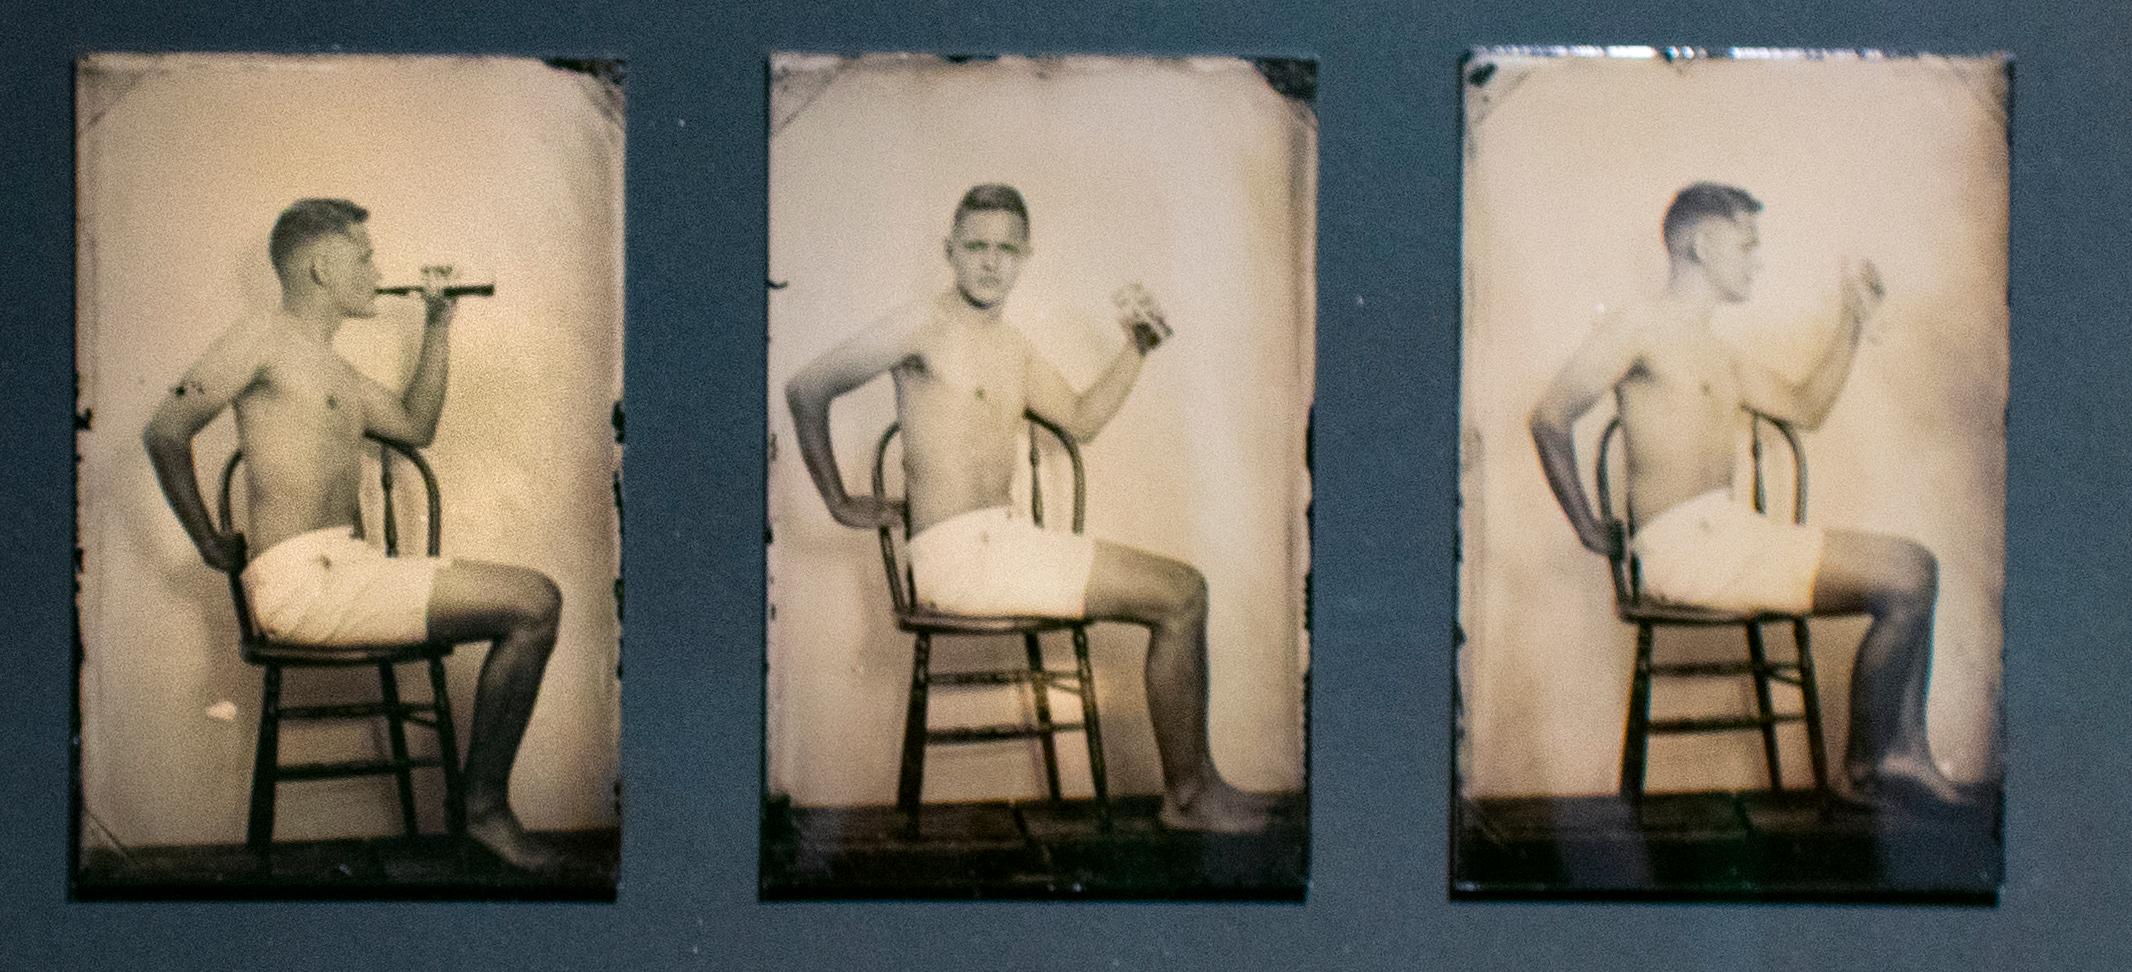 David Sokosh Figurative Photograph - Pause that Refreshes (Vintage Tin Type Triptych with Coca Cola)